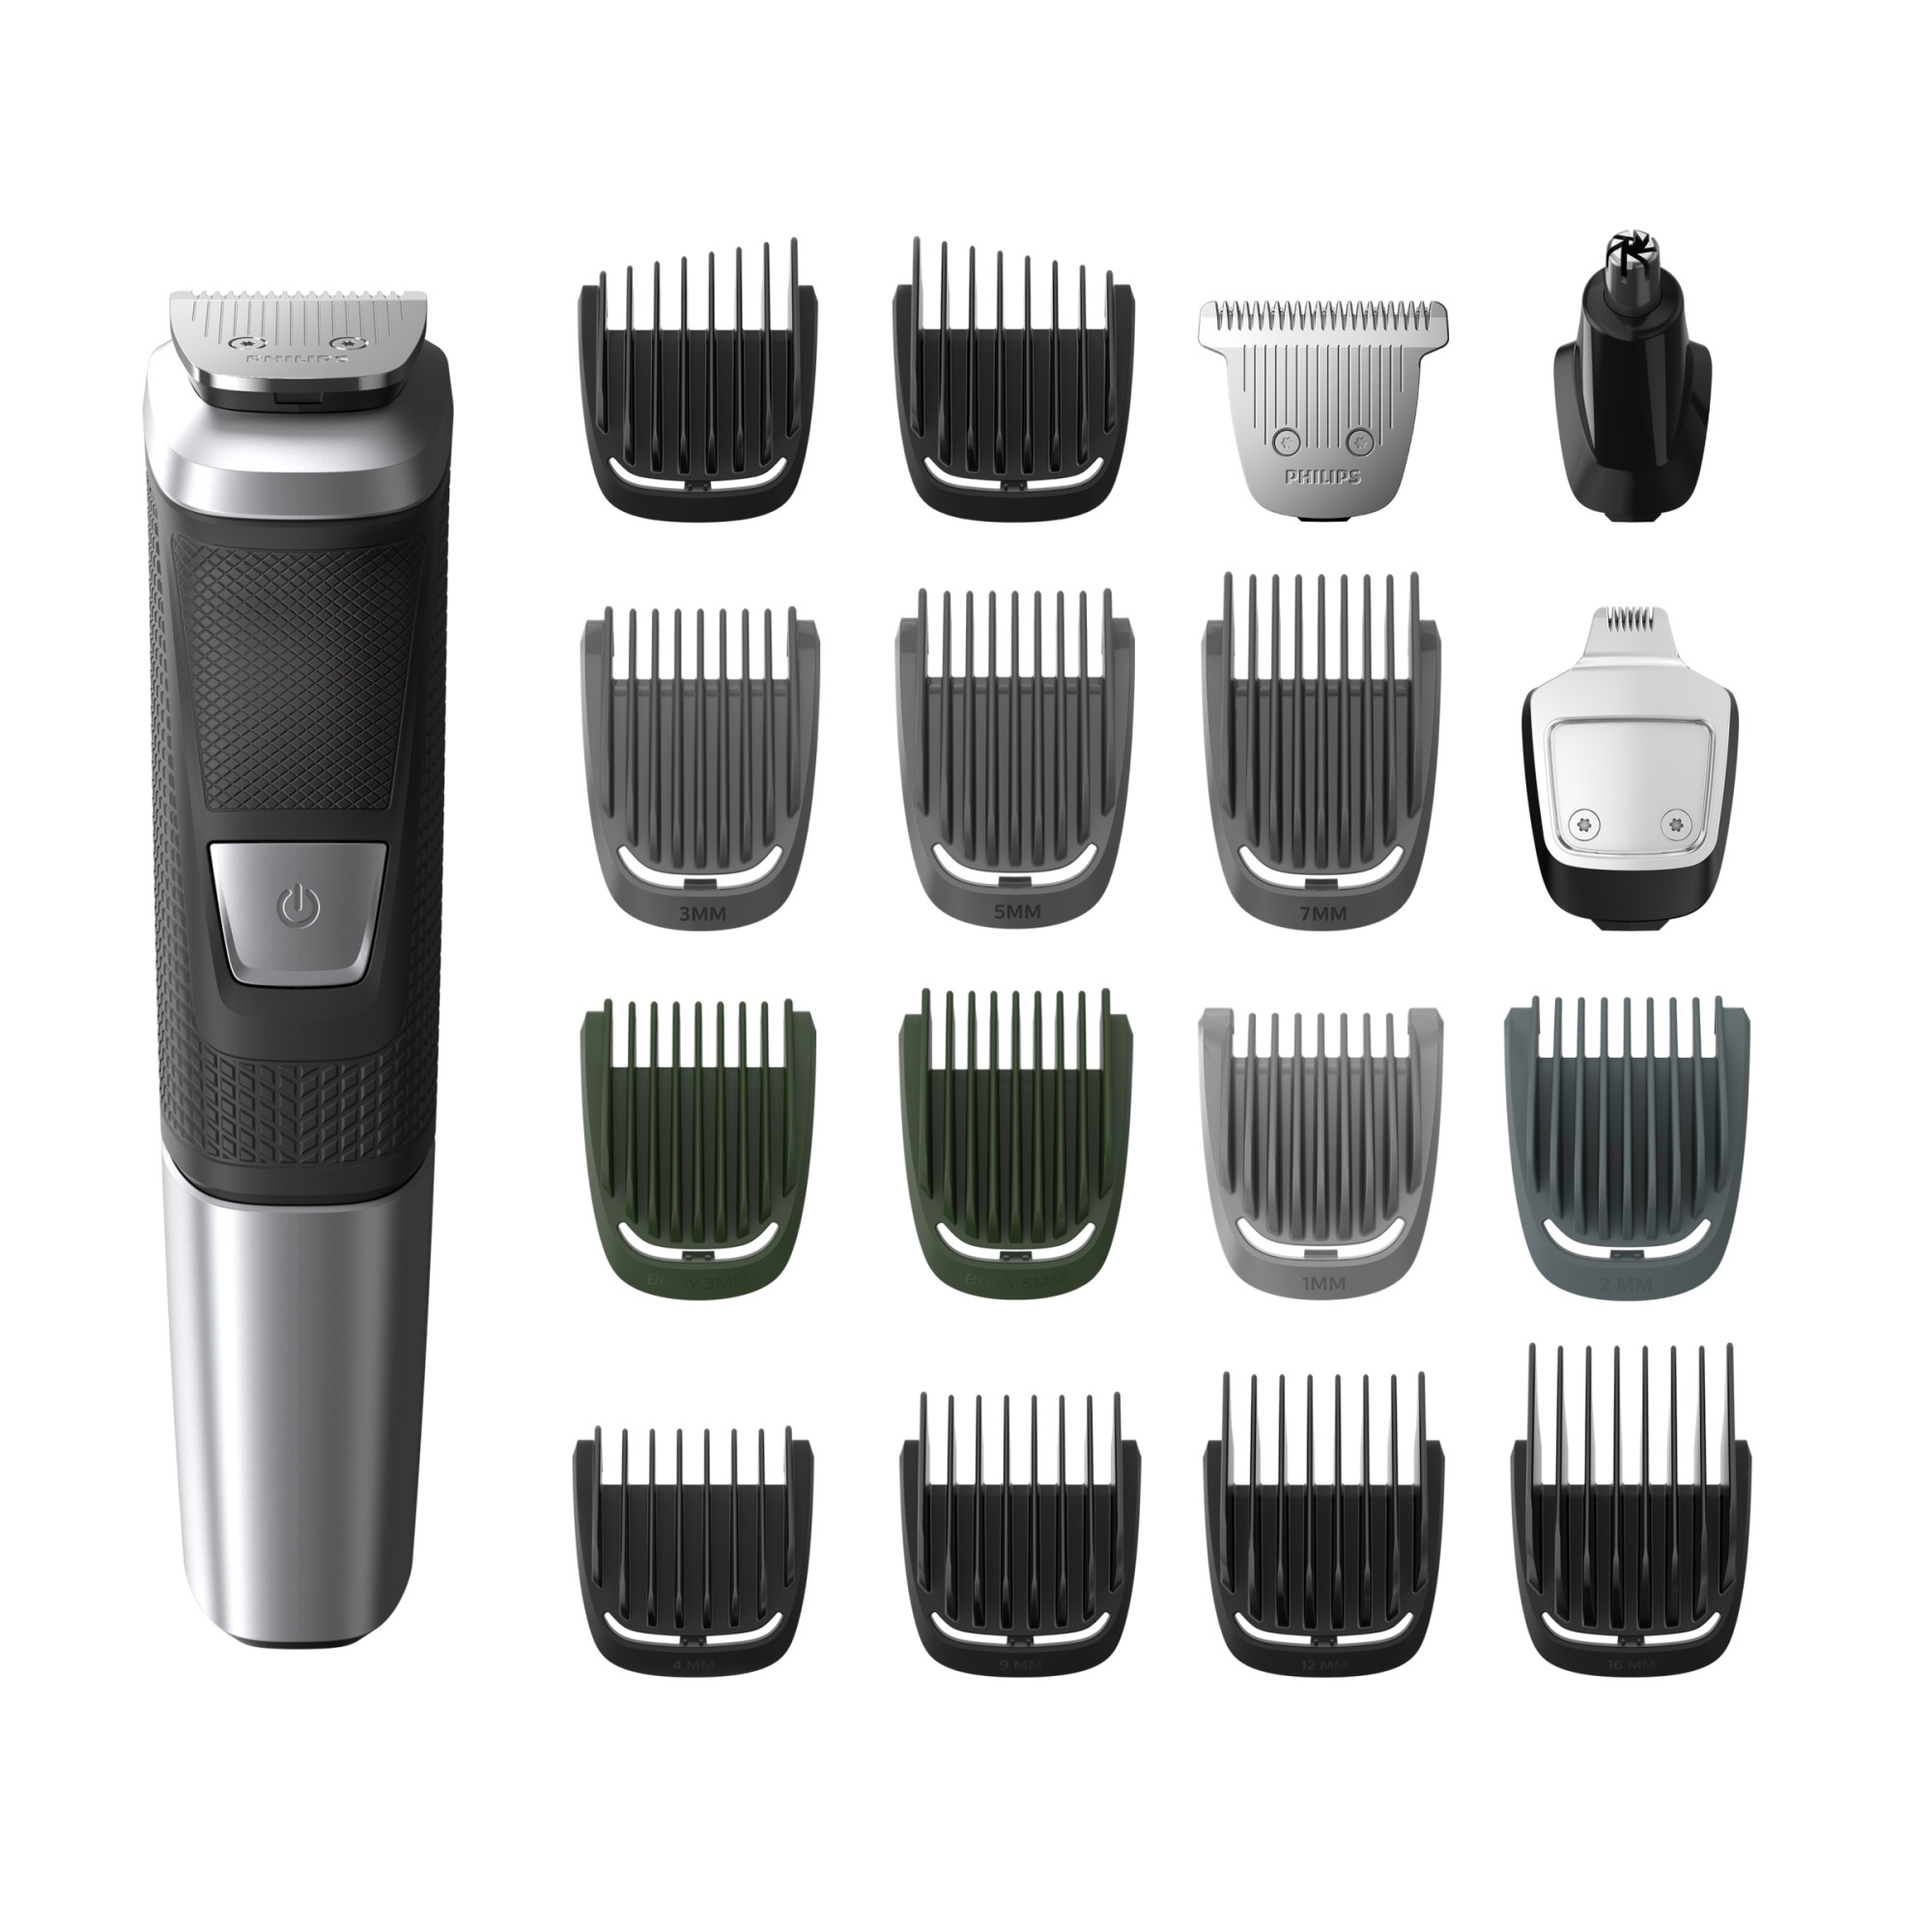 Philips Norelco Multigroom Series 5000 (MG5750/49) 18 Piece, Beard Face, Hair, Body Hair Trimmer For Men - No Blade Oil - image 1 of 18